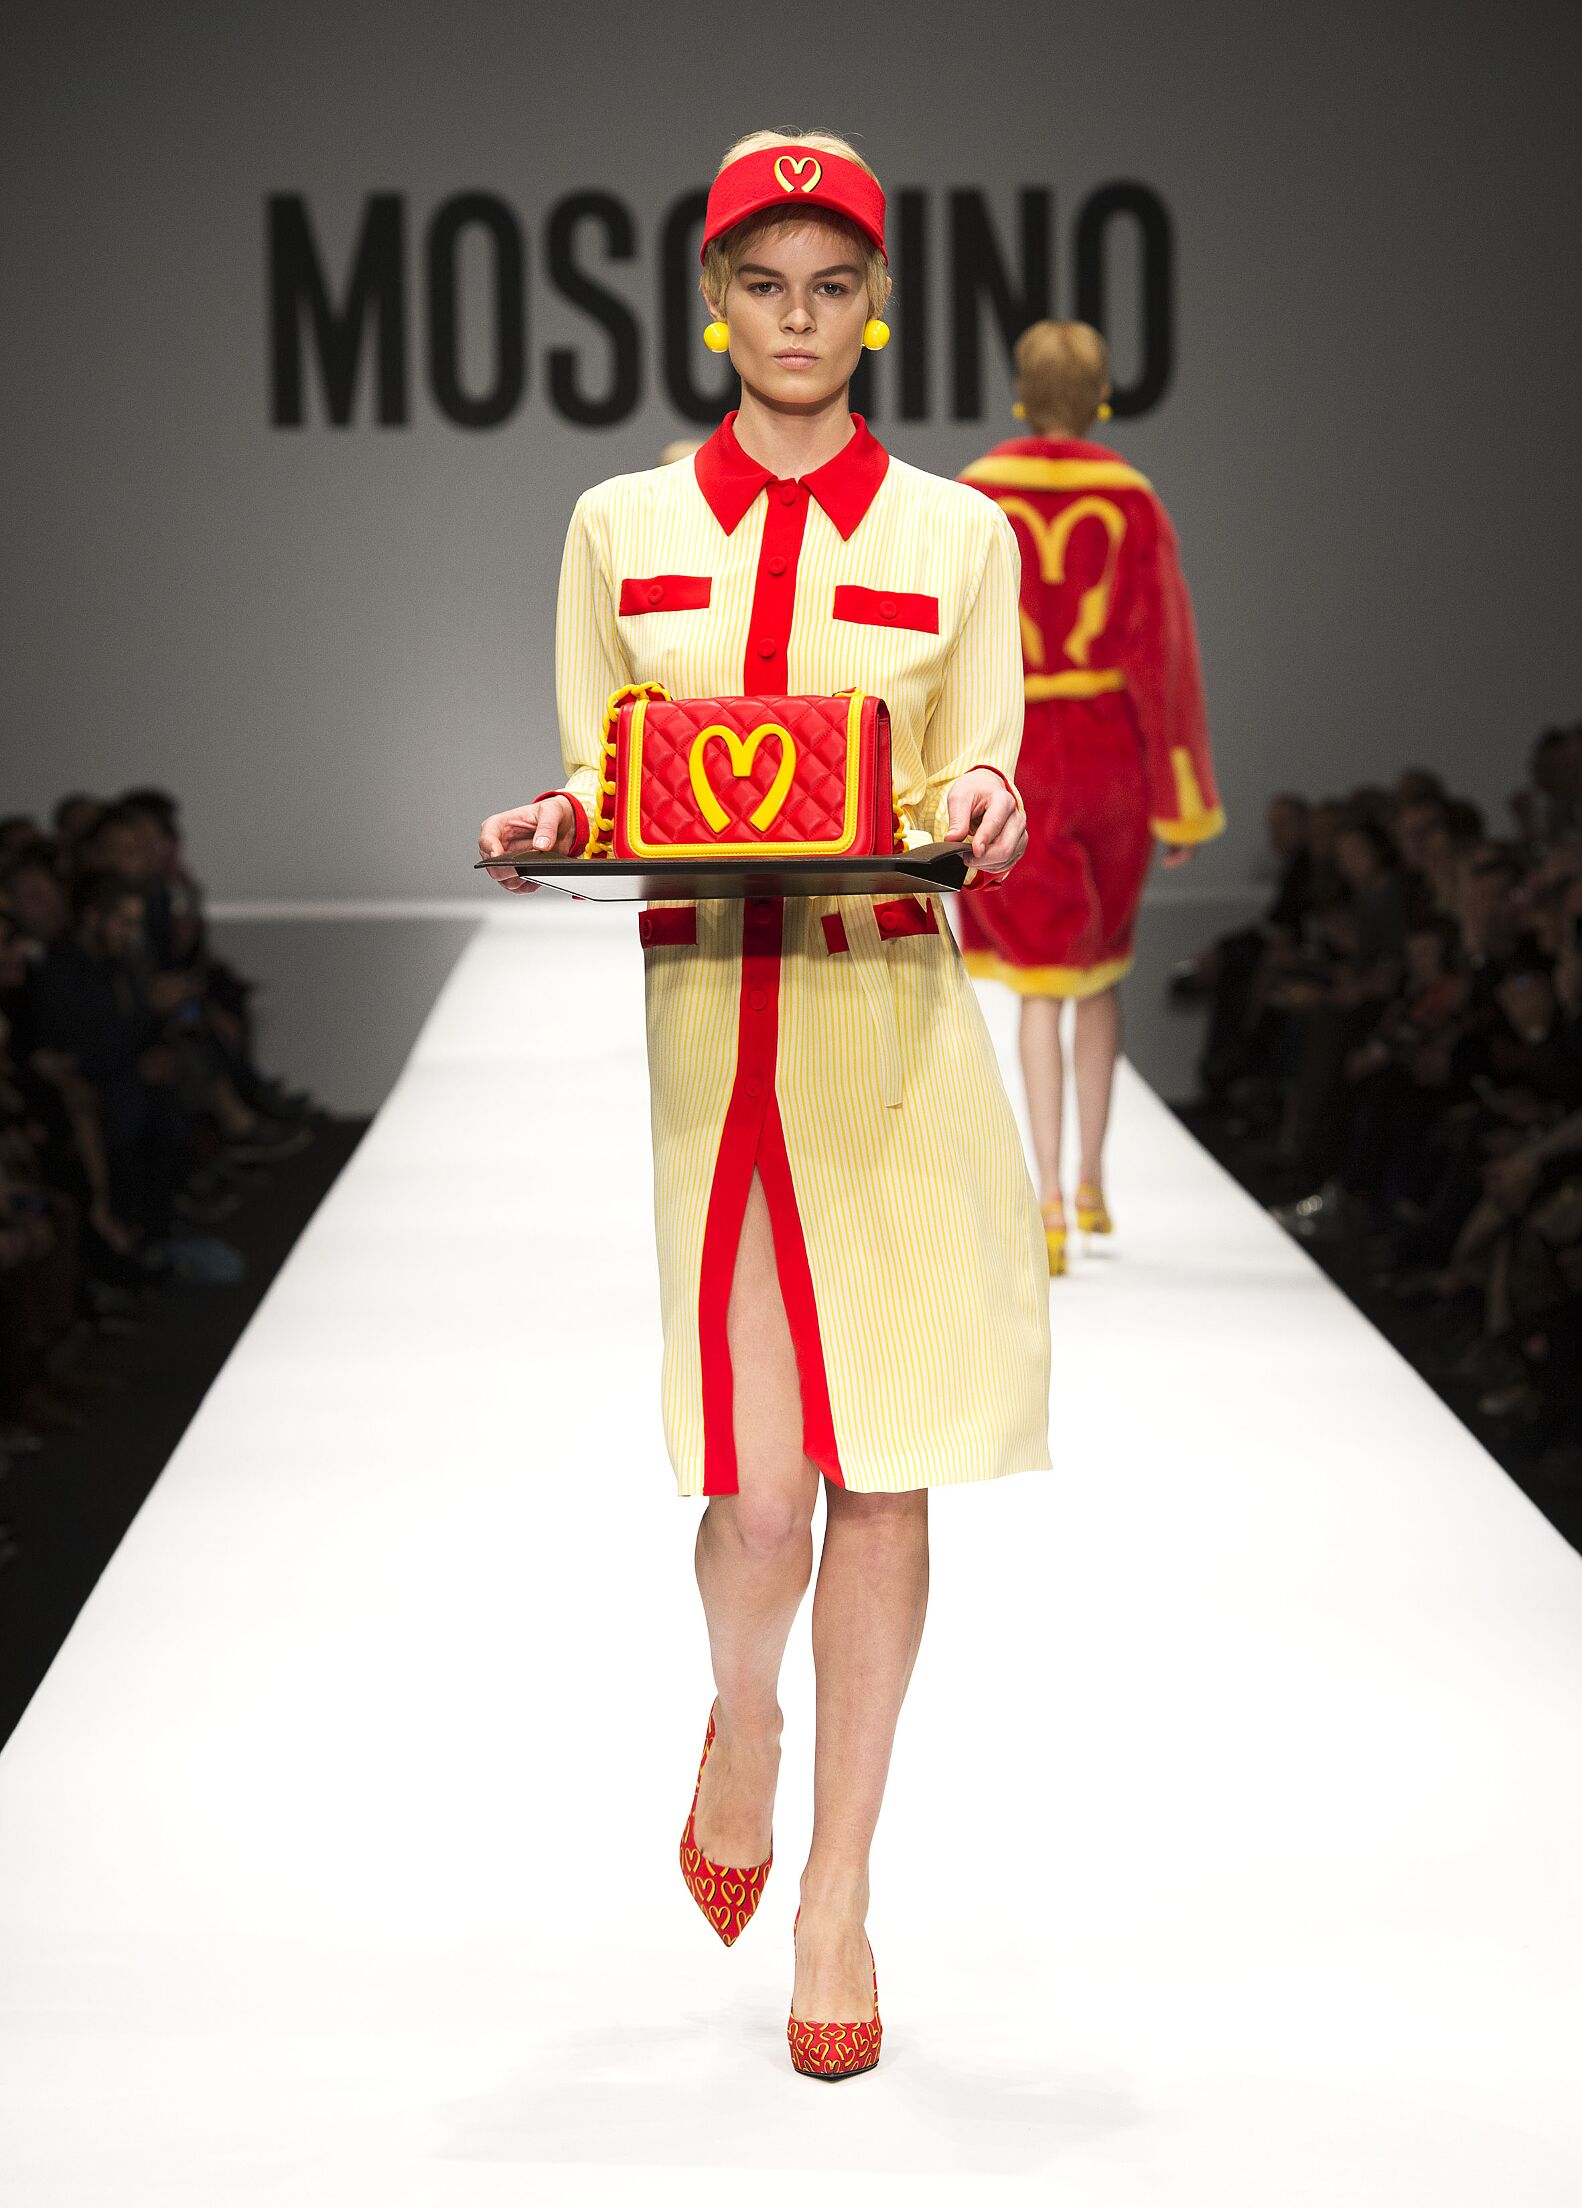 MOSCHINO FALL WINTER 2014-15 WOMEN’S COLLECTION | The Skinny Beep